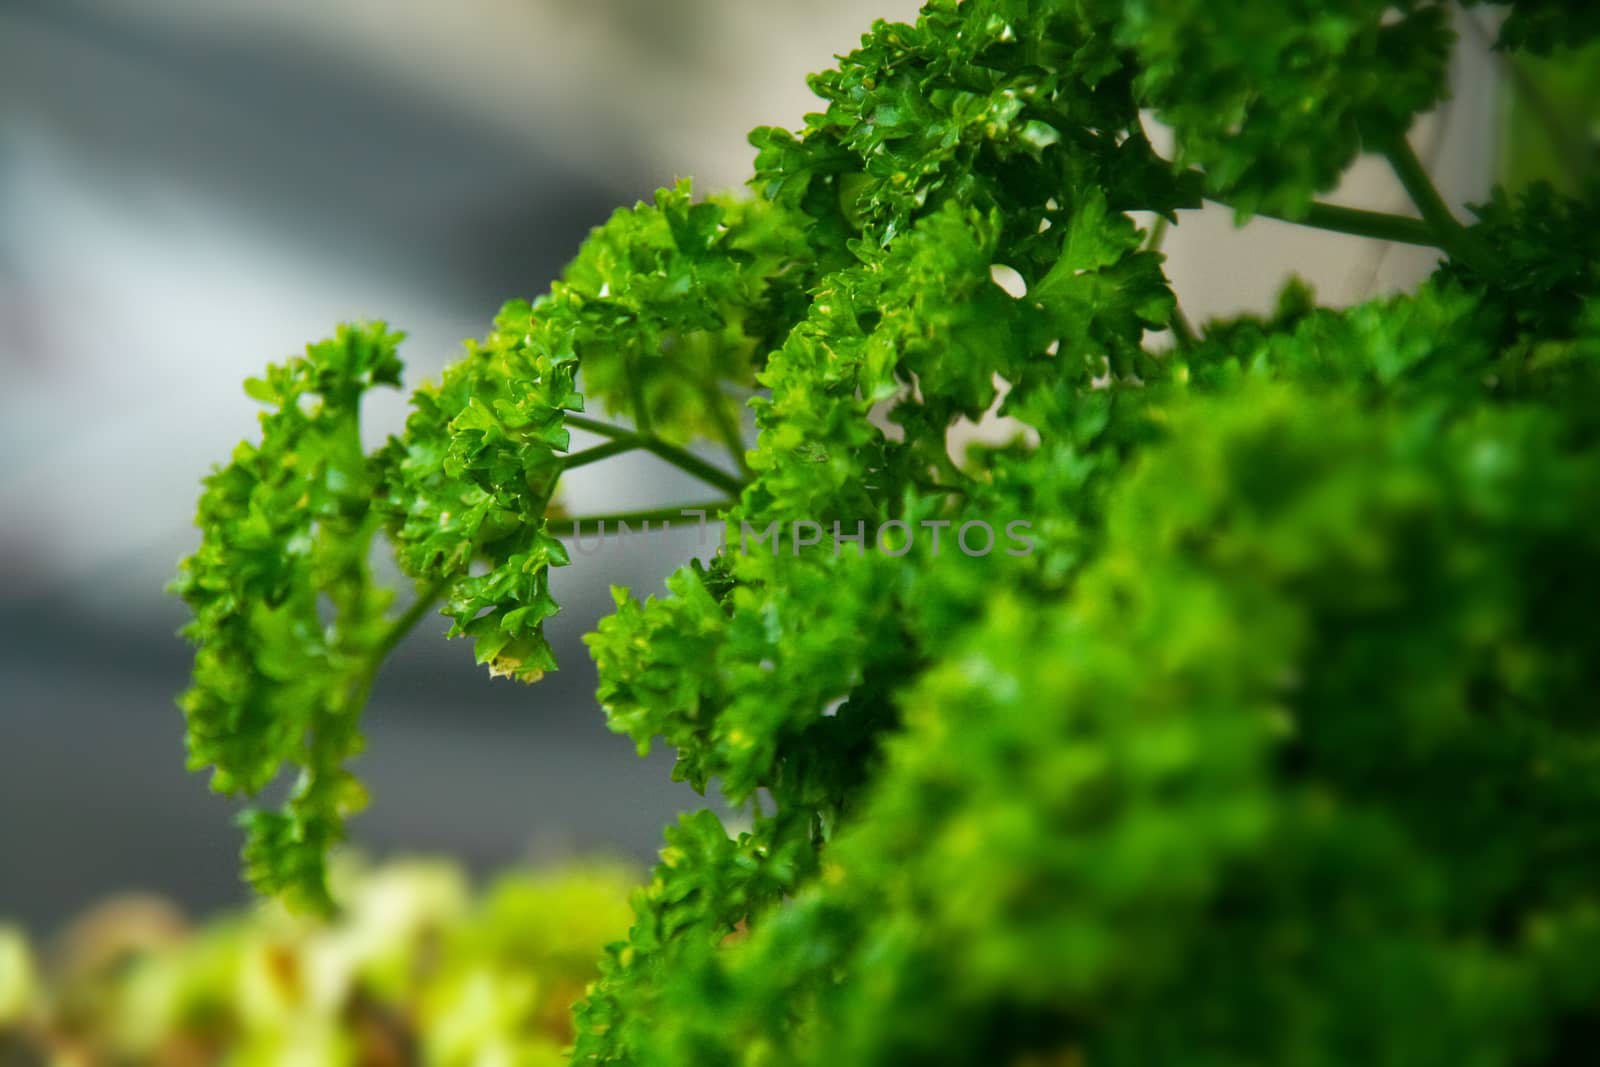 Green Parsely herb close up by stockbp